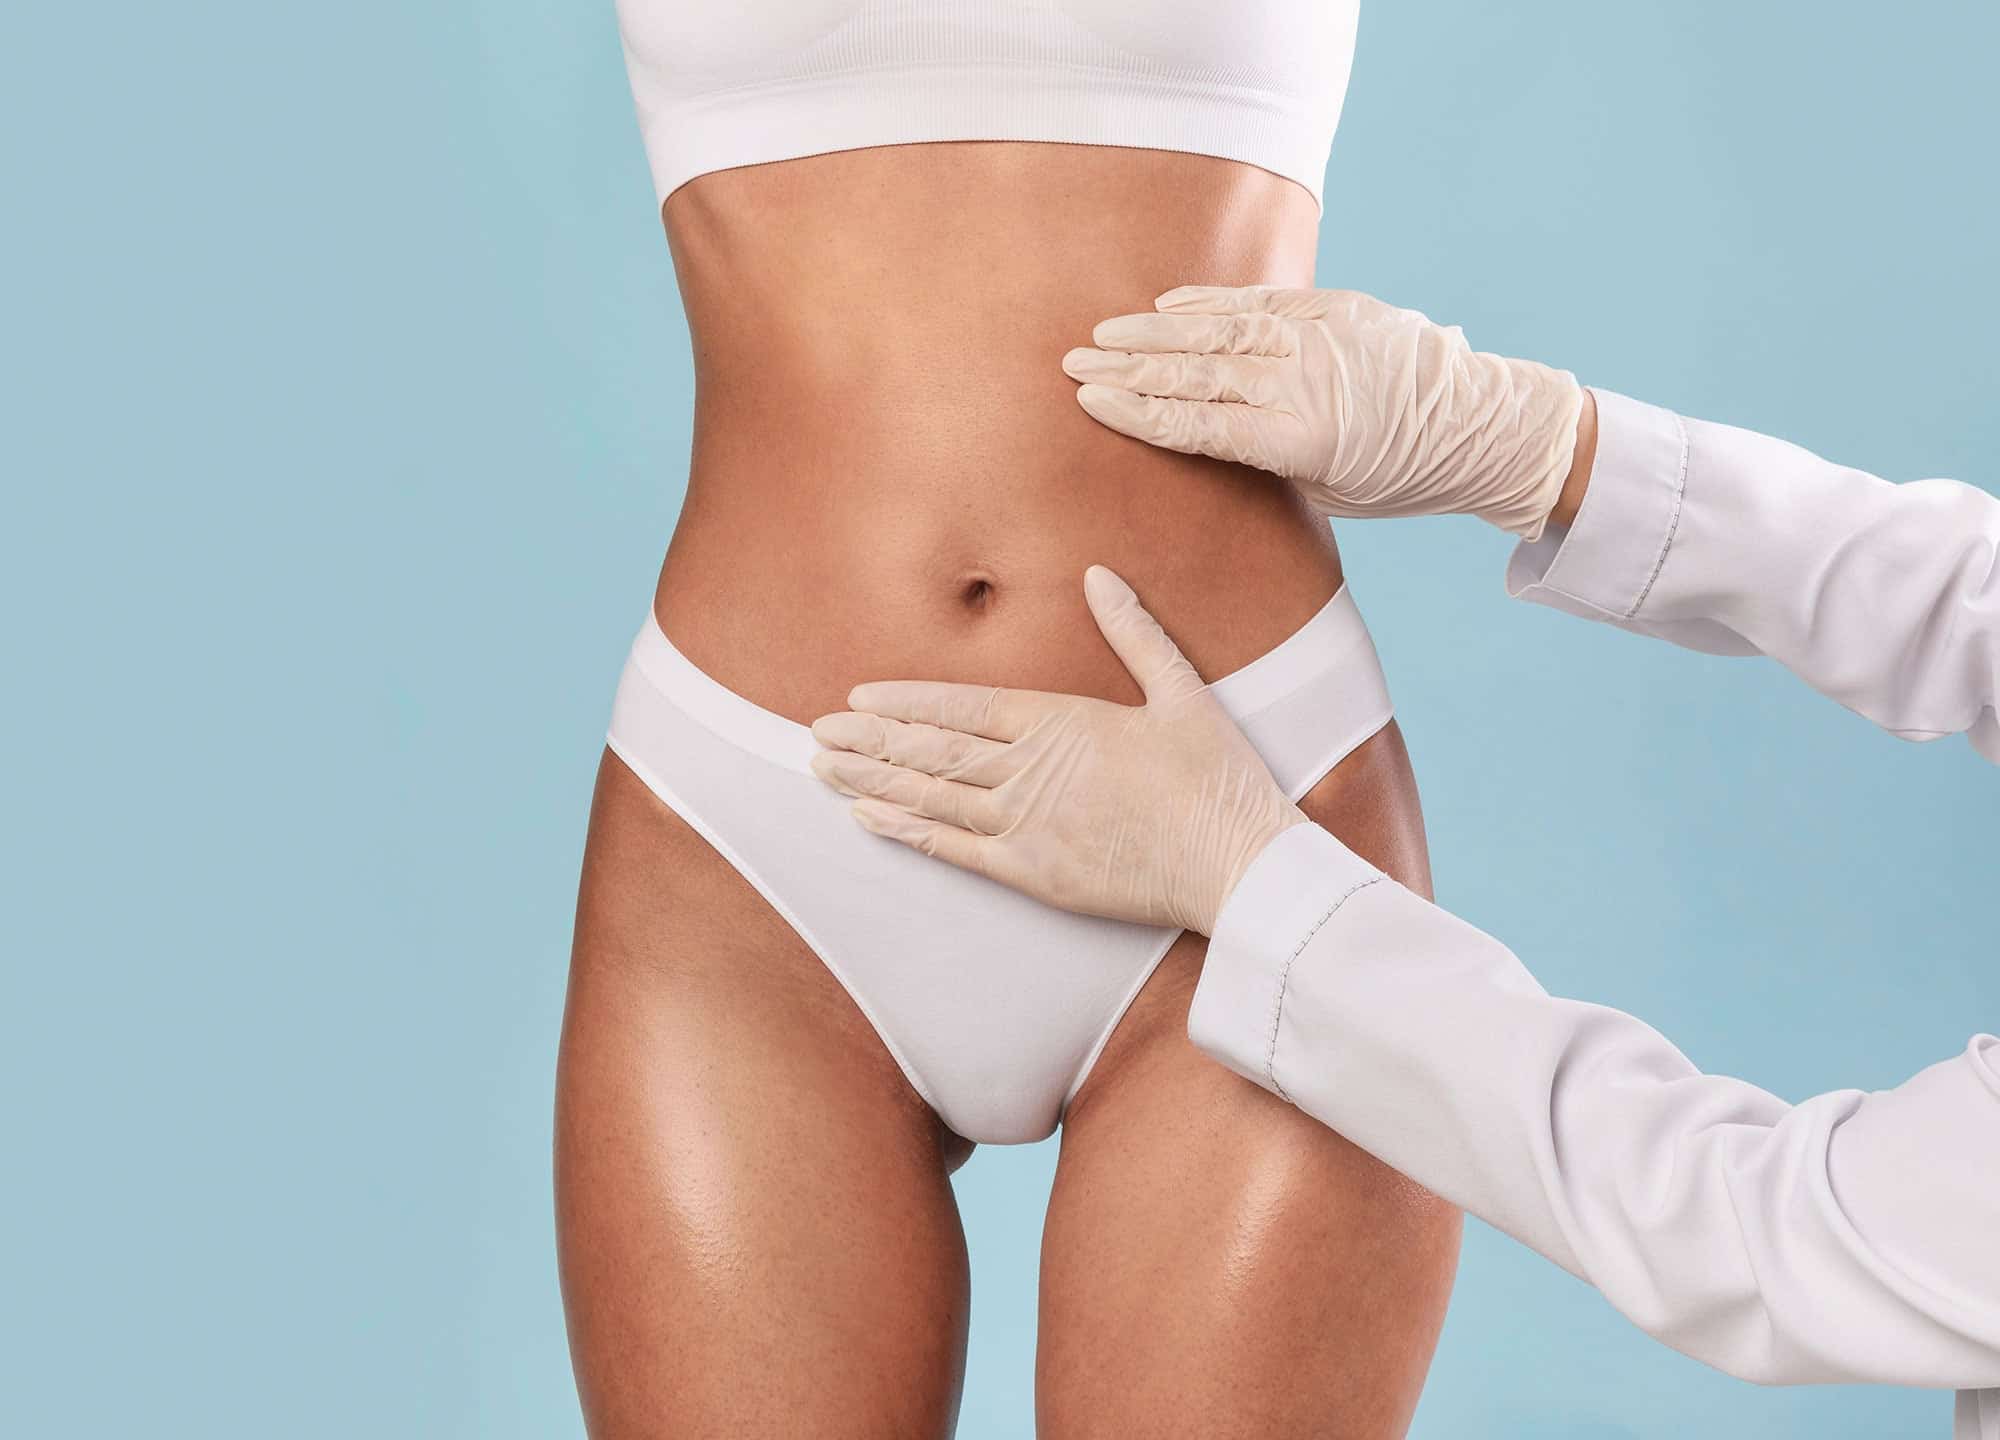 10 Things to Know Before CoolSculpting